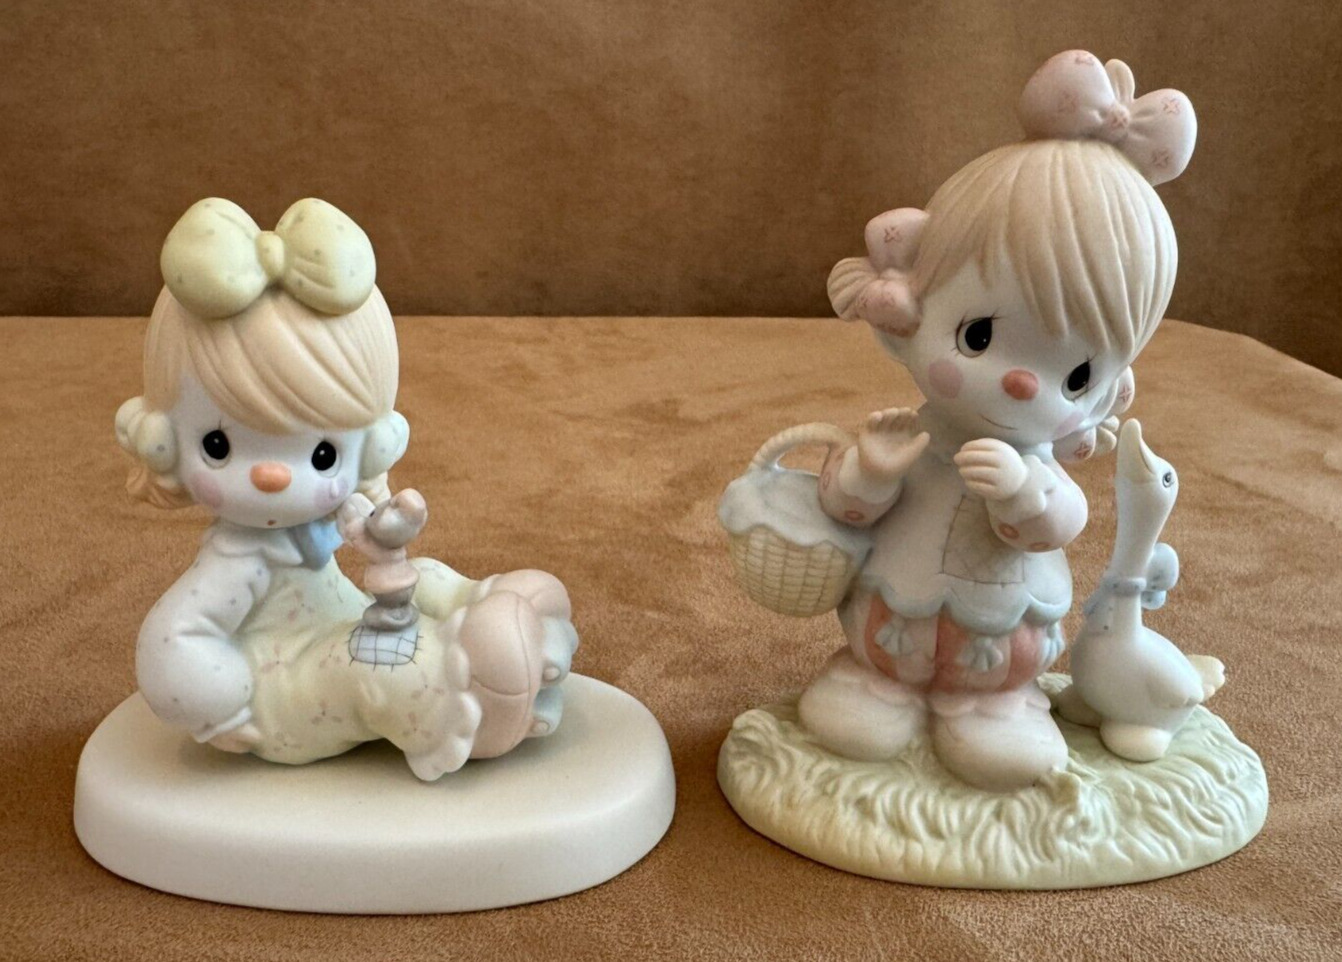 Clown Precious Moments 2 figurines Waddle I do without you 520632 12459 vintage